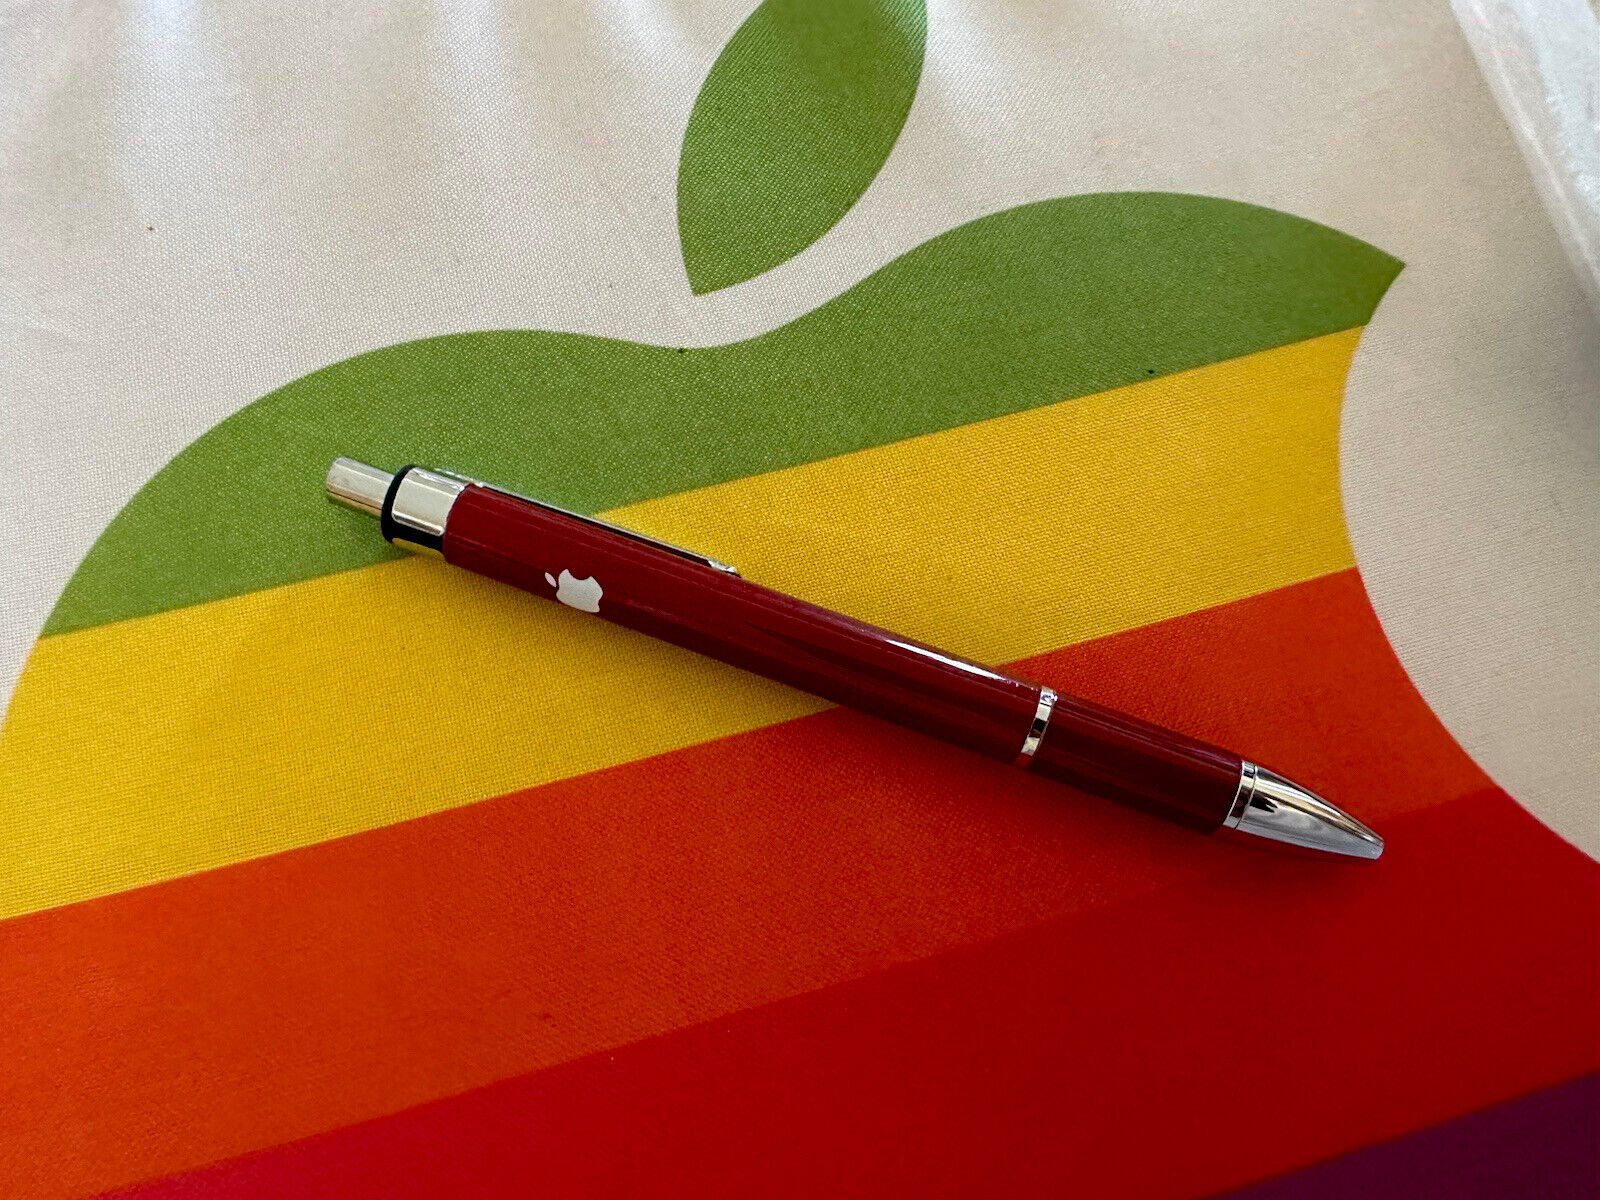 APPLE COMPANY EMPLOYEE STORE HQ WHITE LOGO APPLE SUPREME RED BALL POINT PEN